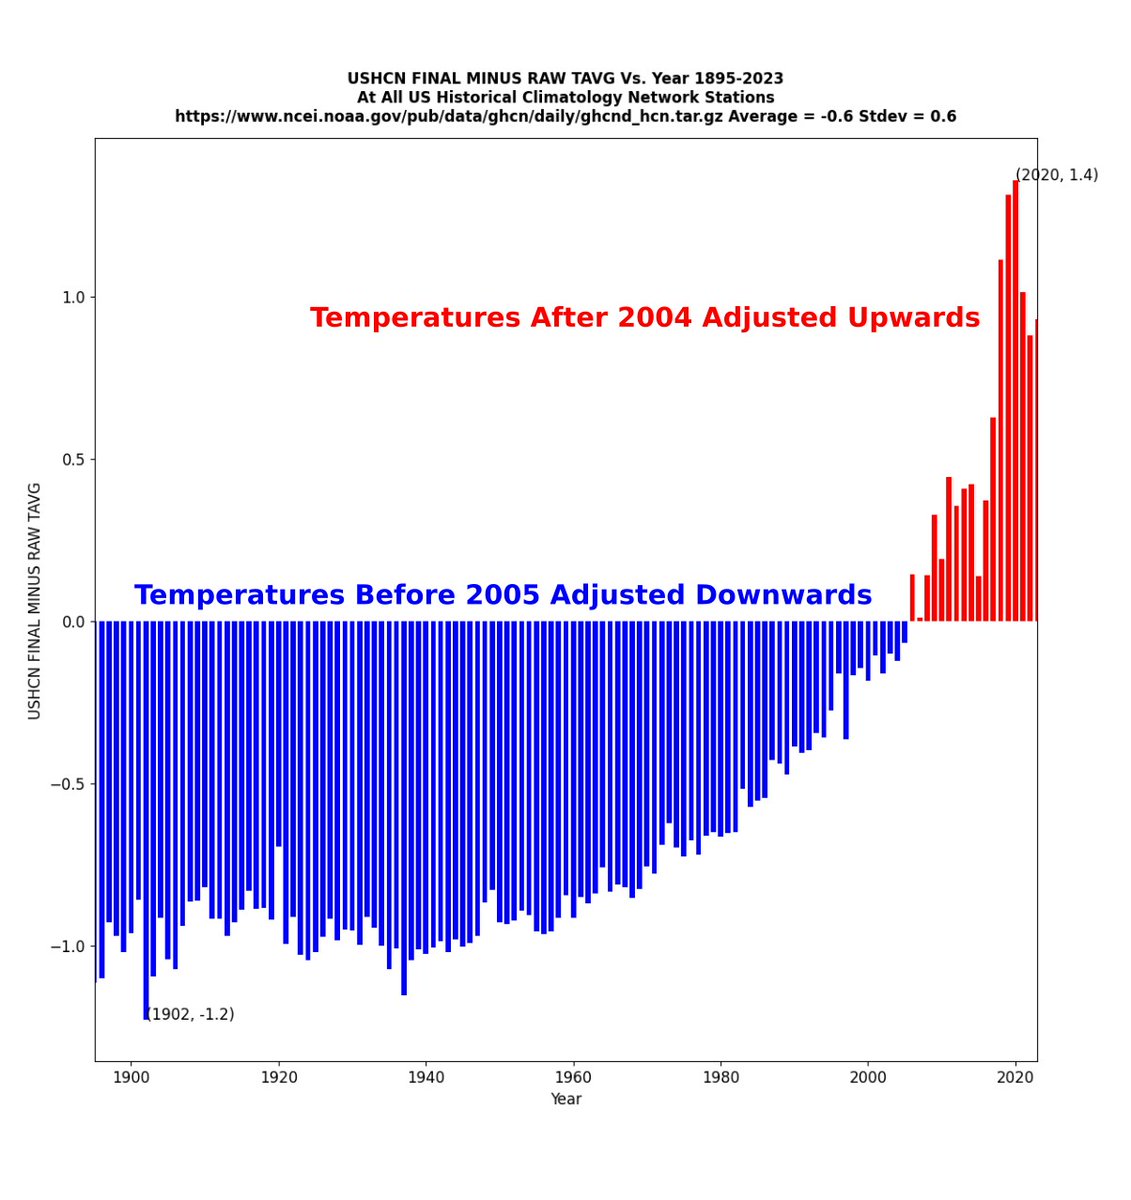 There is no explanation for this sort of data tampering, other than fraud. @NOAA shouldn't be doing it and there shouldn't be any need to talk about it.